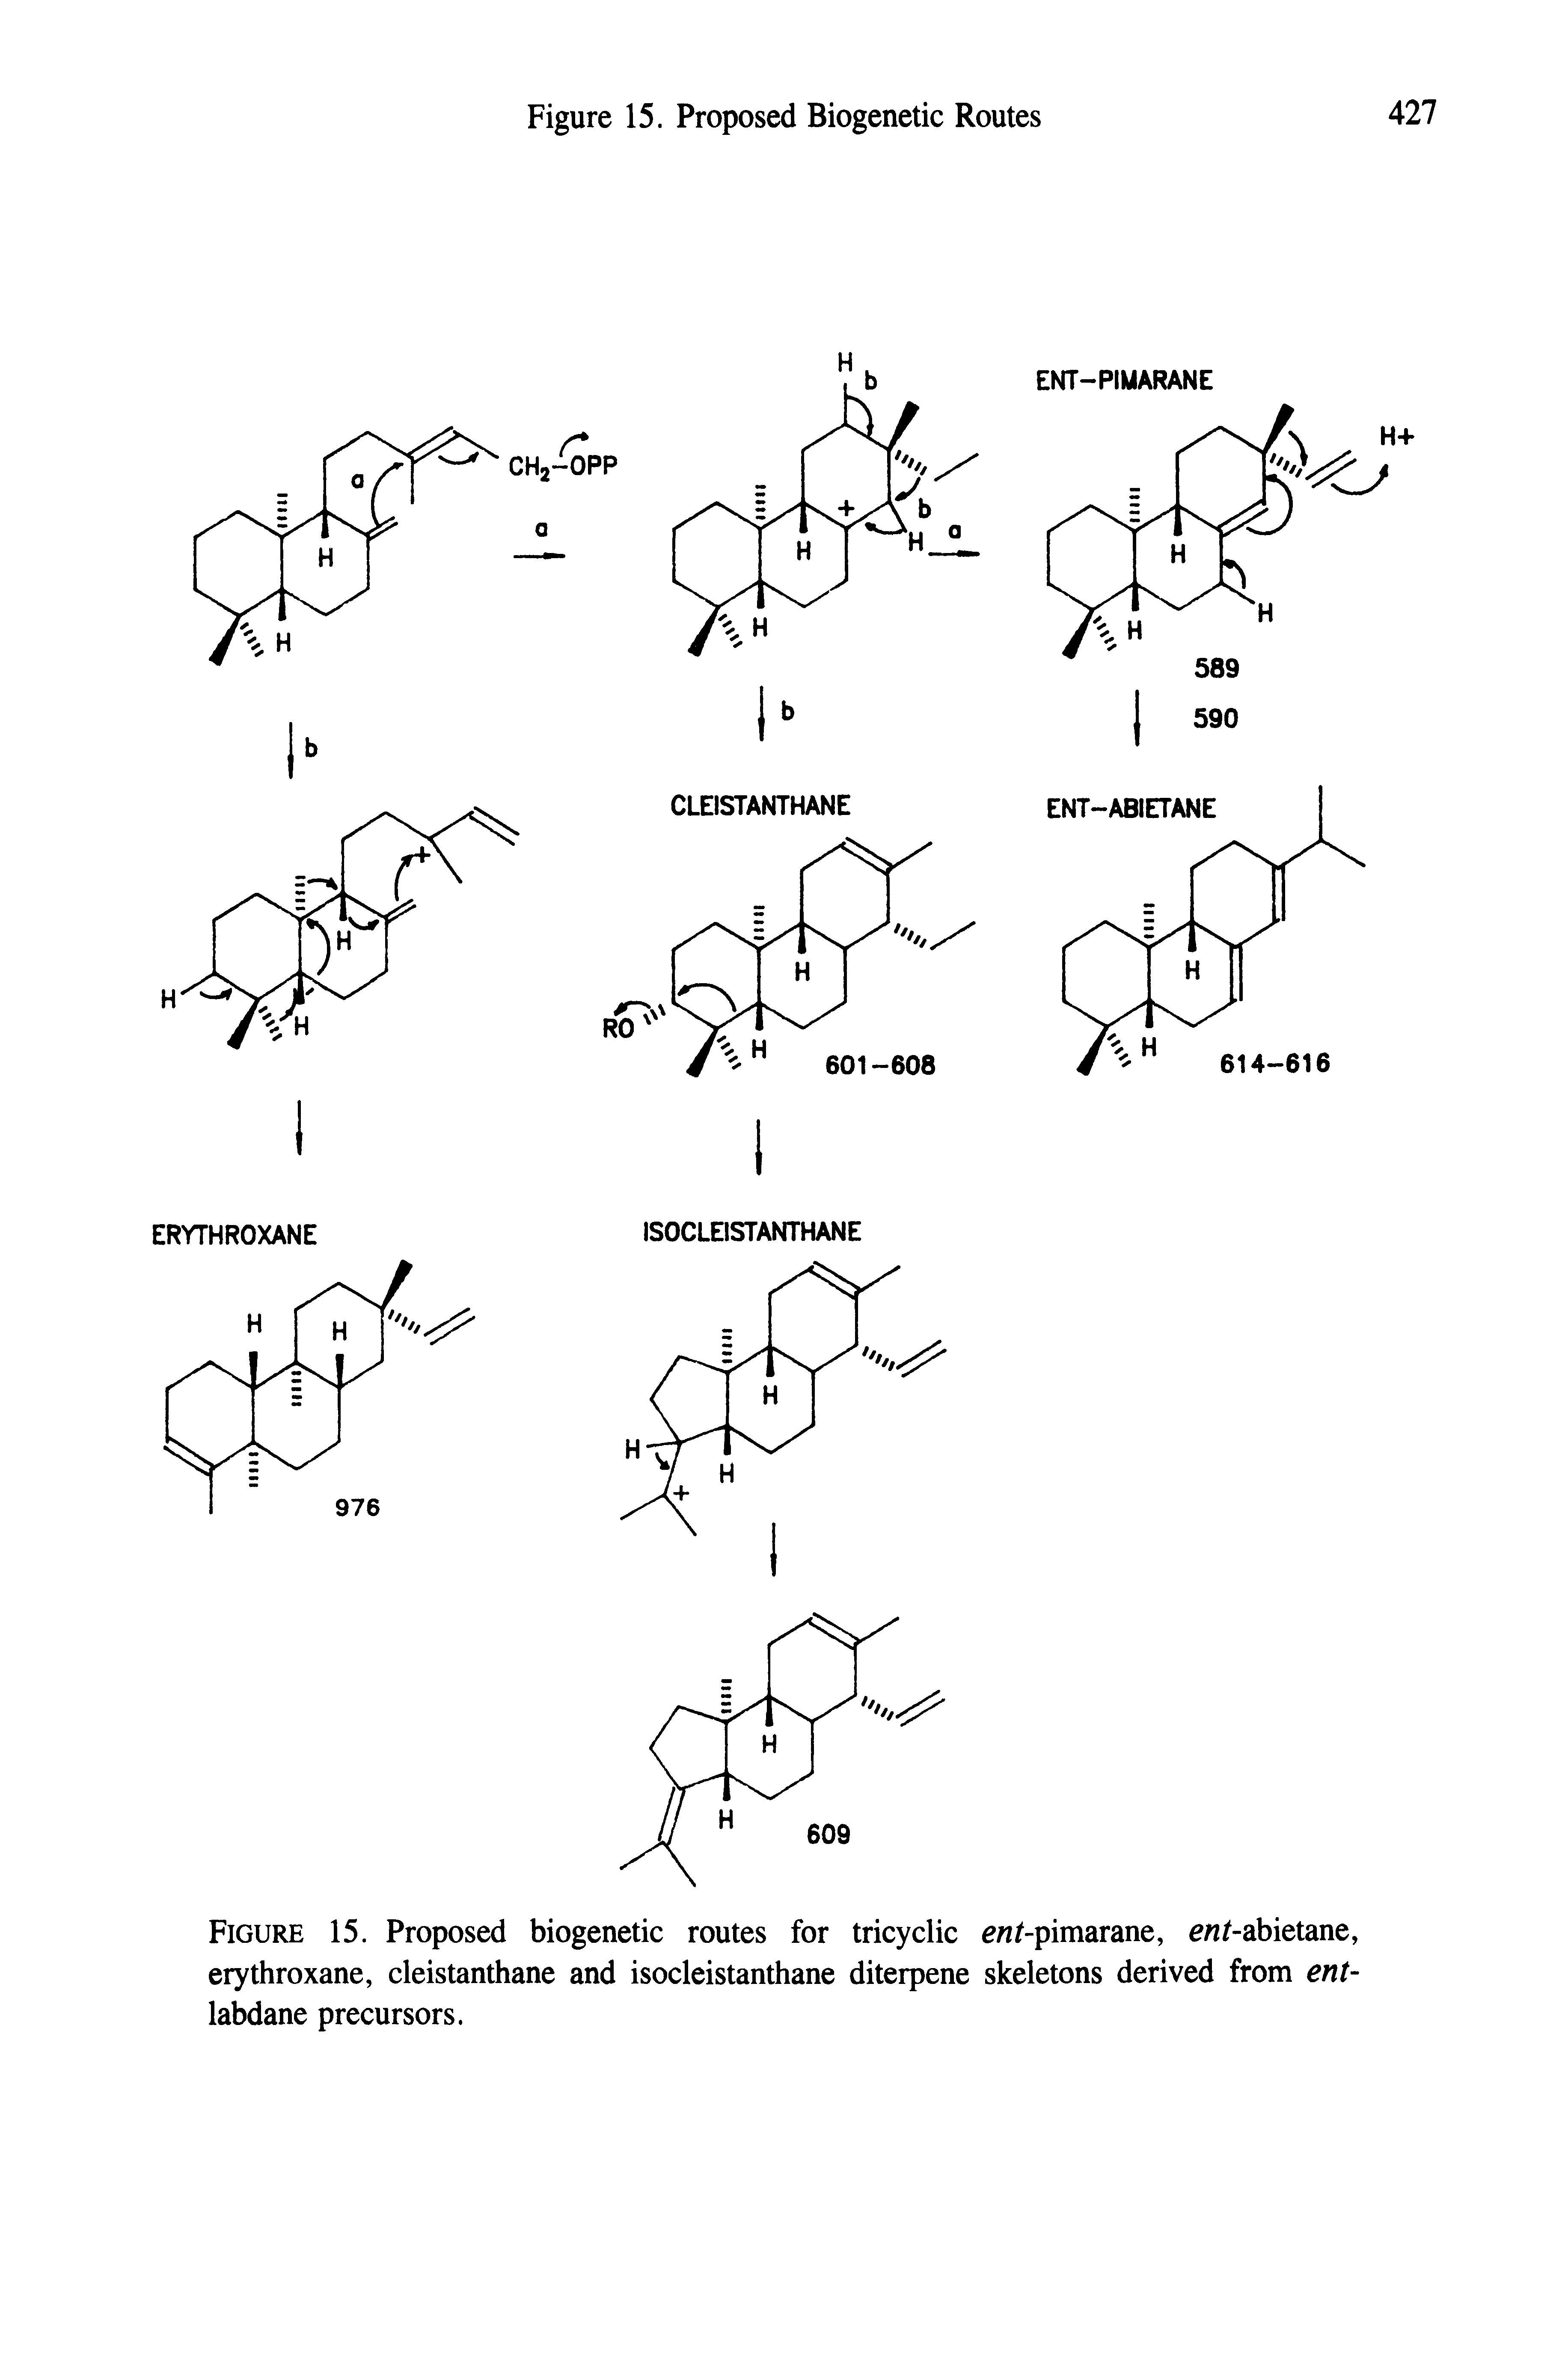 Figure 15. Proposed biogenetic routes for tricyclic e /-pimarane, e /-abietane, erythroxane, cleistanthane and isocleistanthane diterpene skeletons derived from ent-labdane precursors.